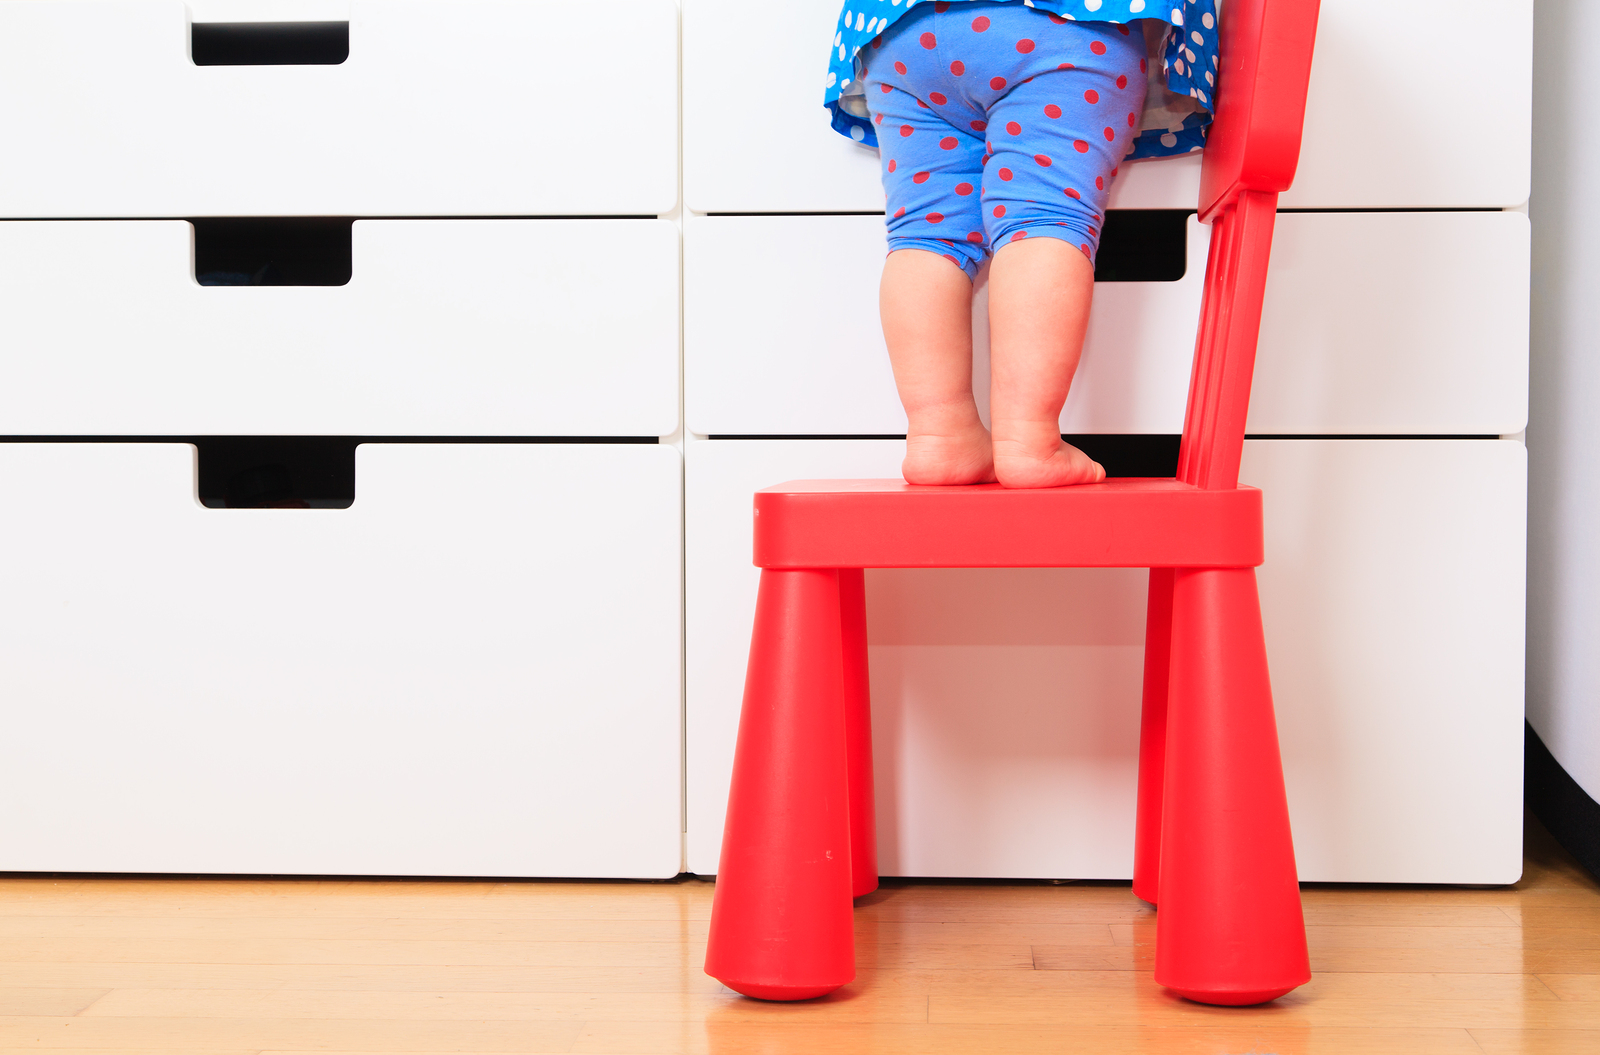 Lock down your furniture for kids’ safety